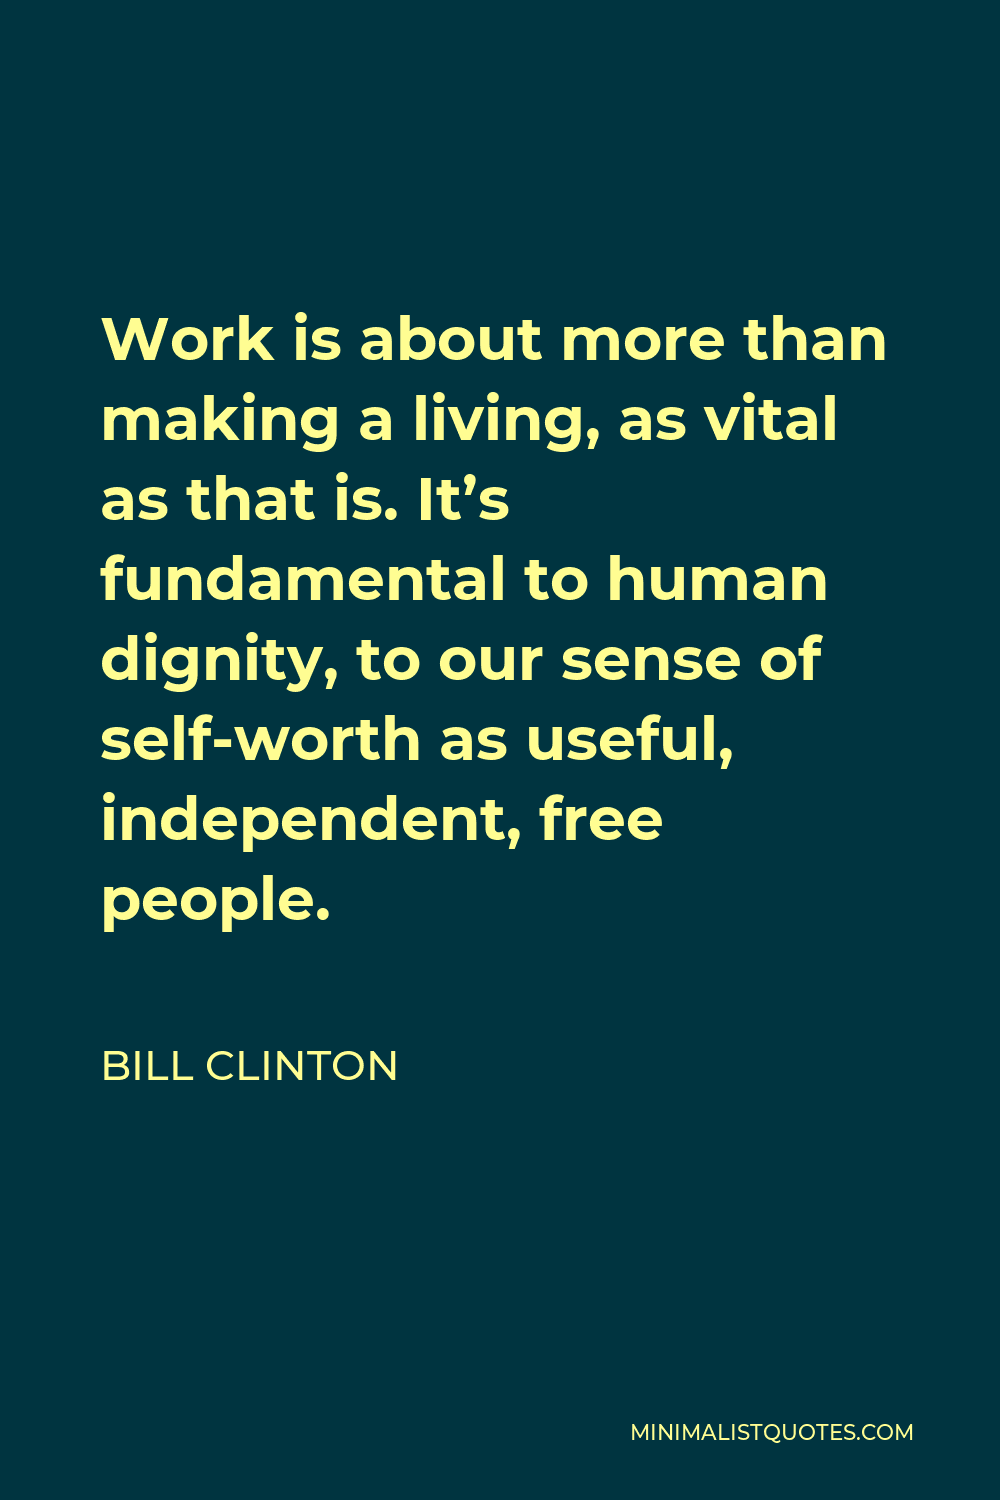 Bill Clinton Quote - Work is about more than making a living, as vital as that is. It’s fundamental to human dignity, to our sense of self-worth as useful, independent, free people.